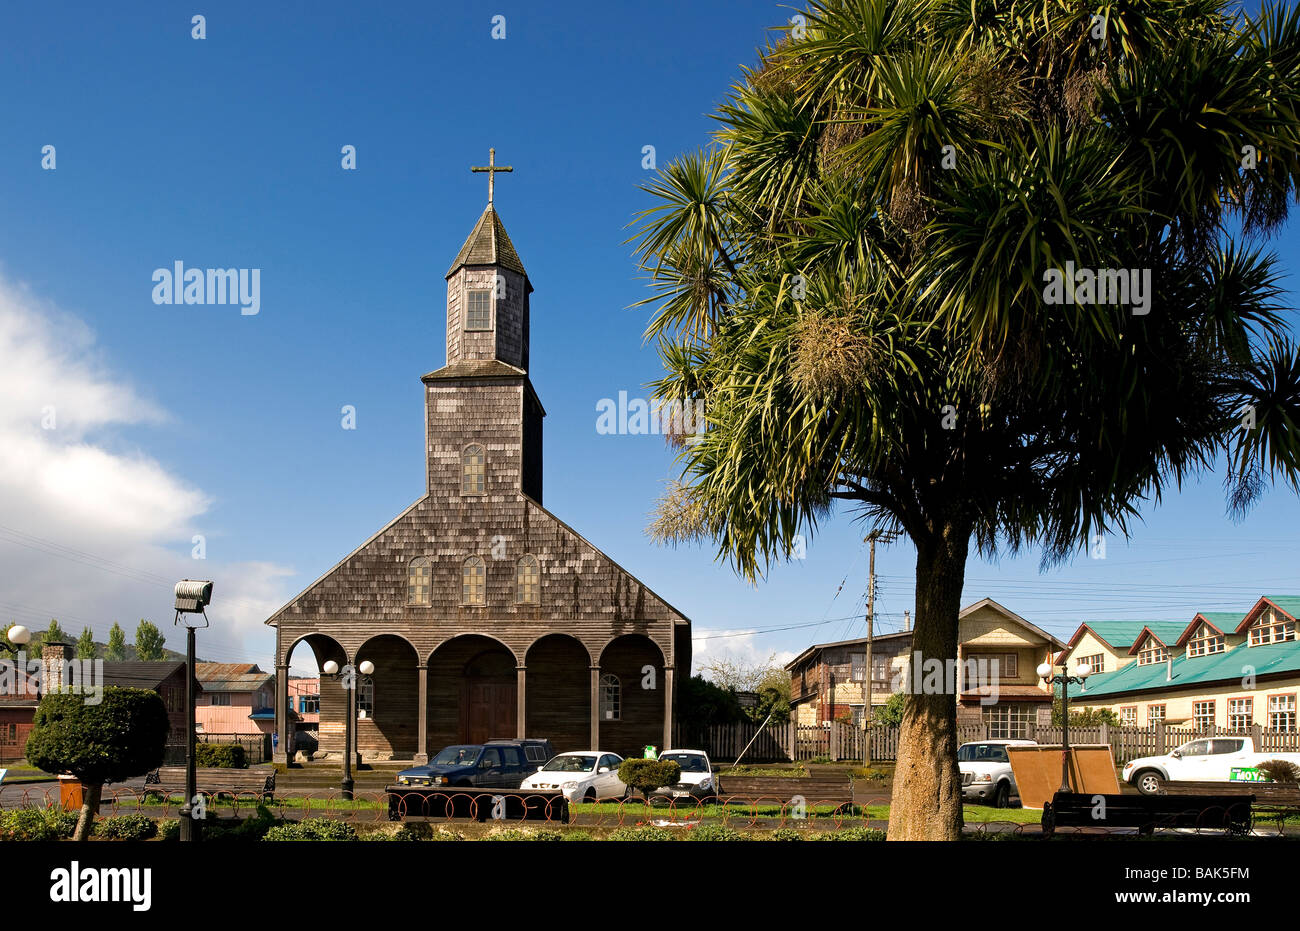 Chile, Los Lagos Region, Chiloé Island, Quinchao Island, Achao, wooden church listed as World Heritage by UNESCO Stock Photo